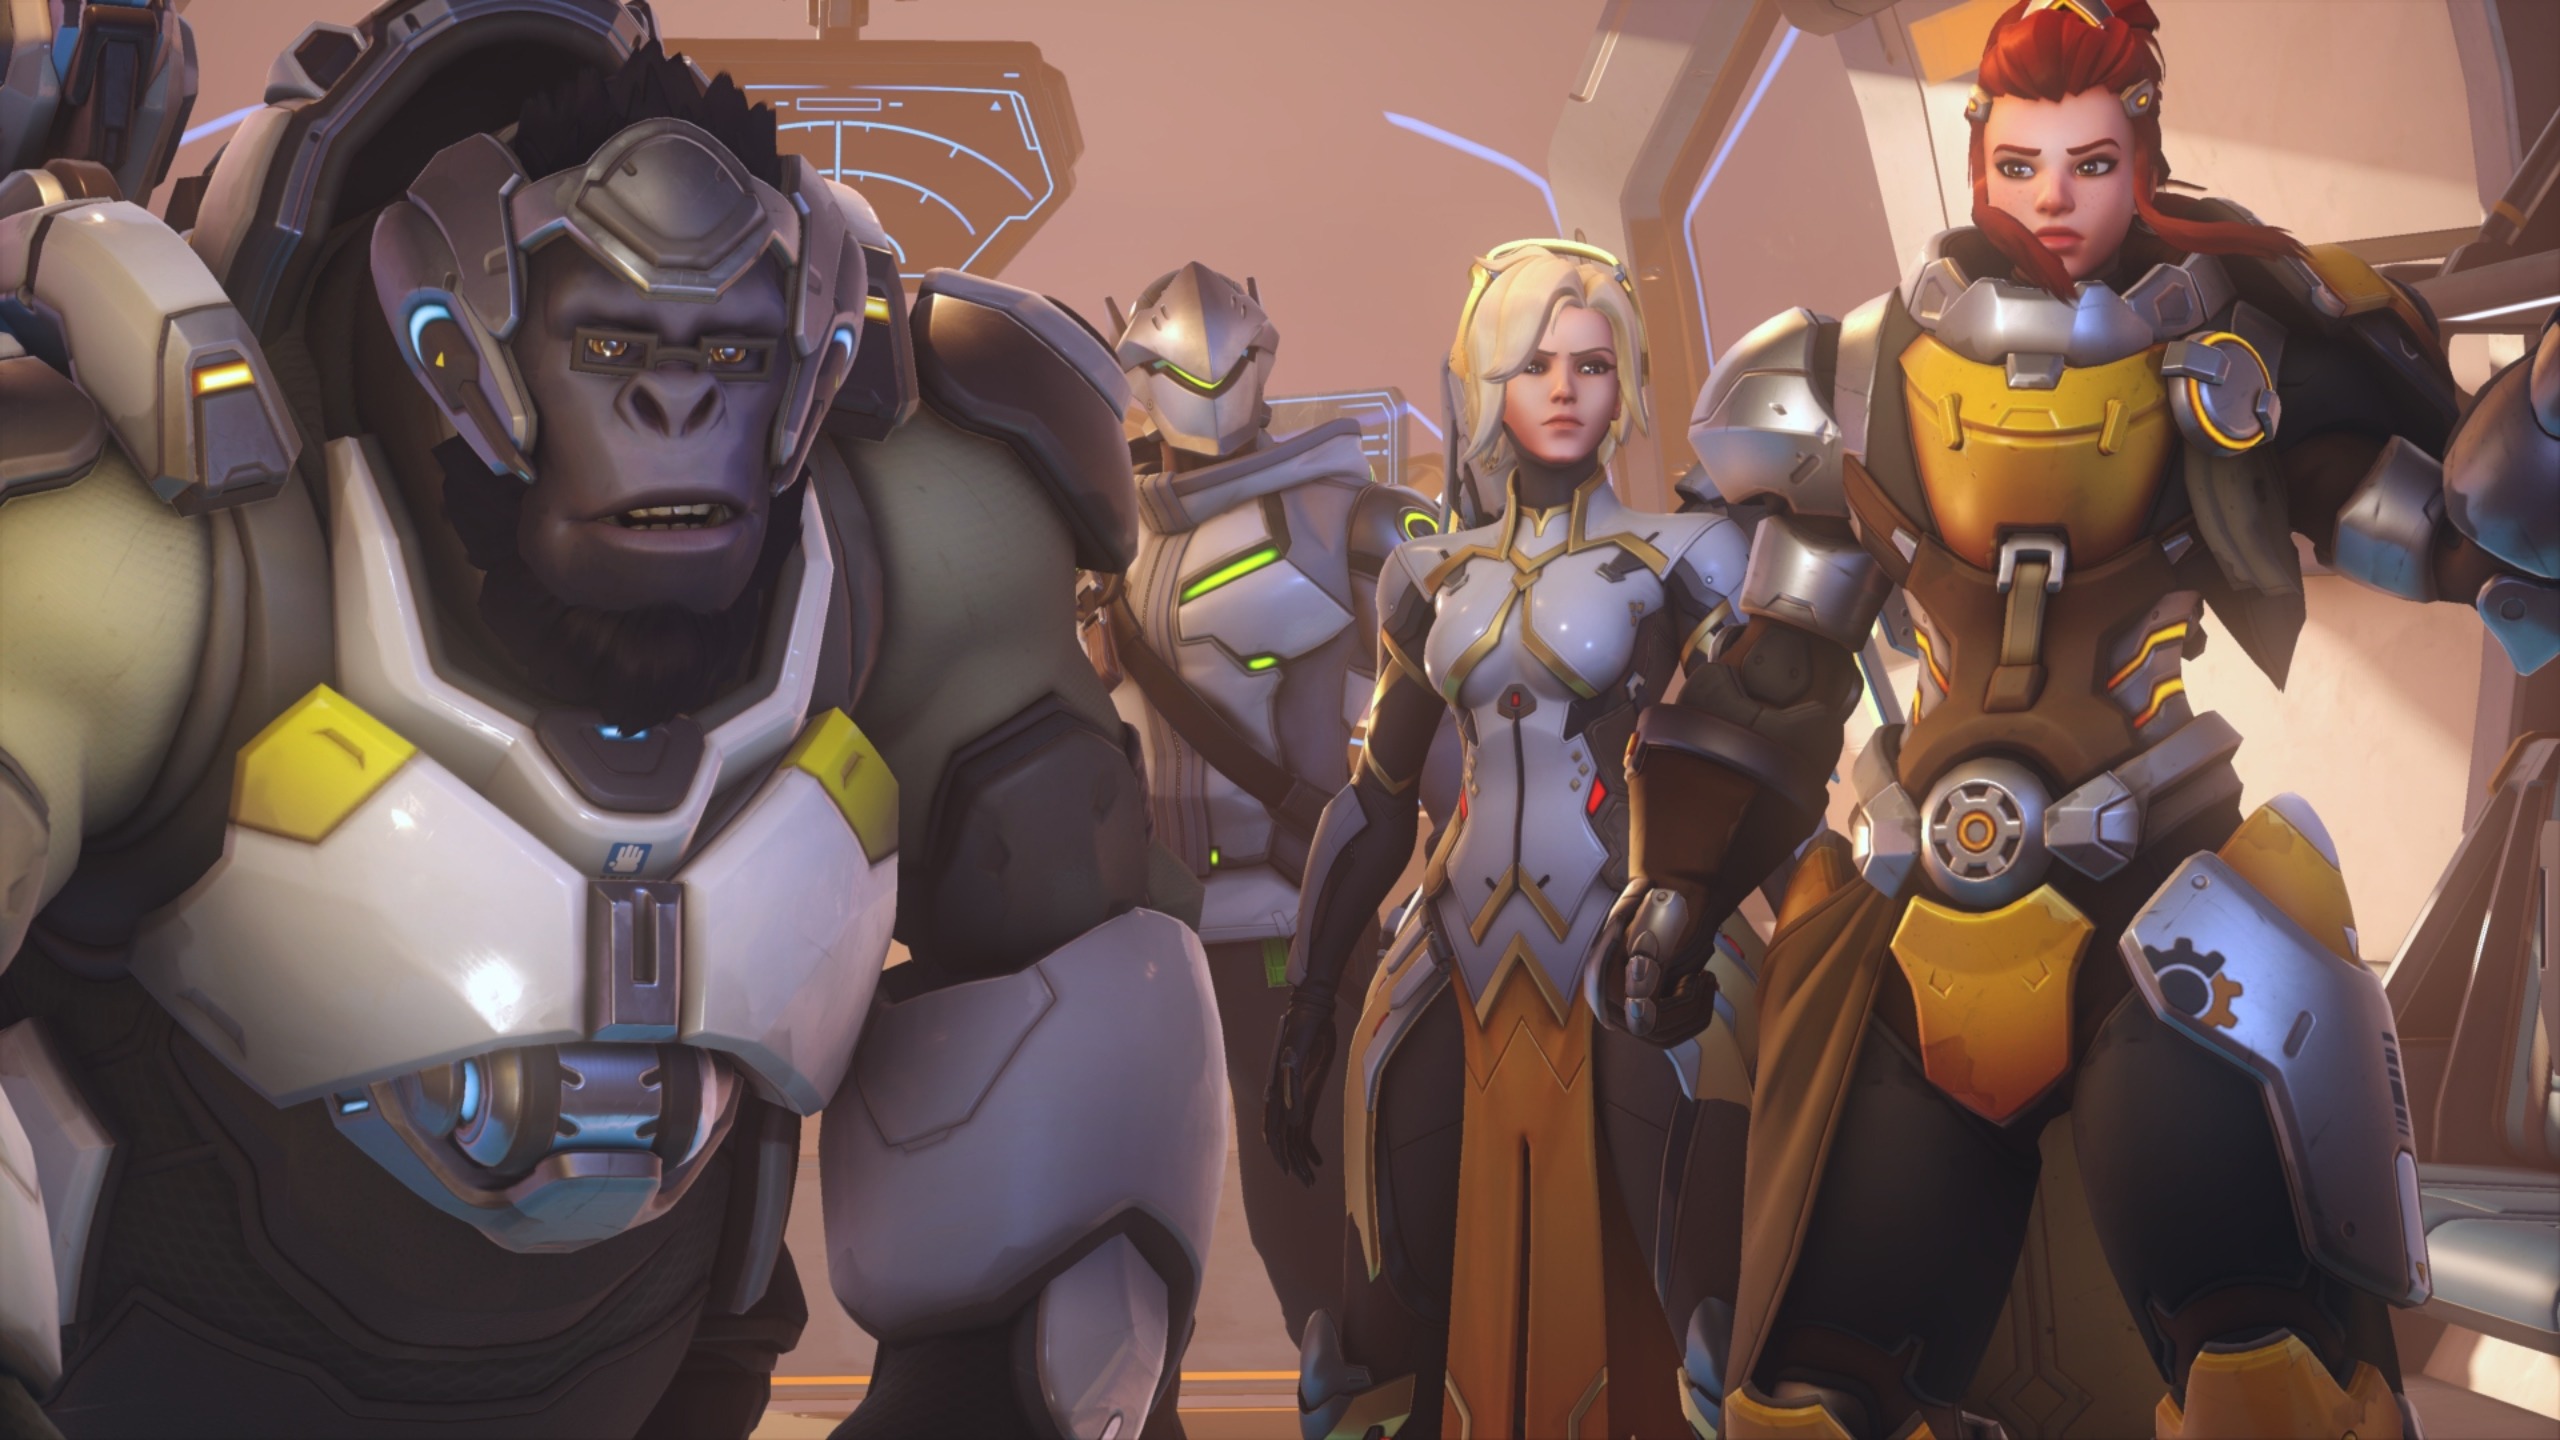 How to Download Overwatch 2 on PS4, PS5, Xbox, Nintendo Switch & PC